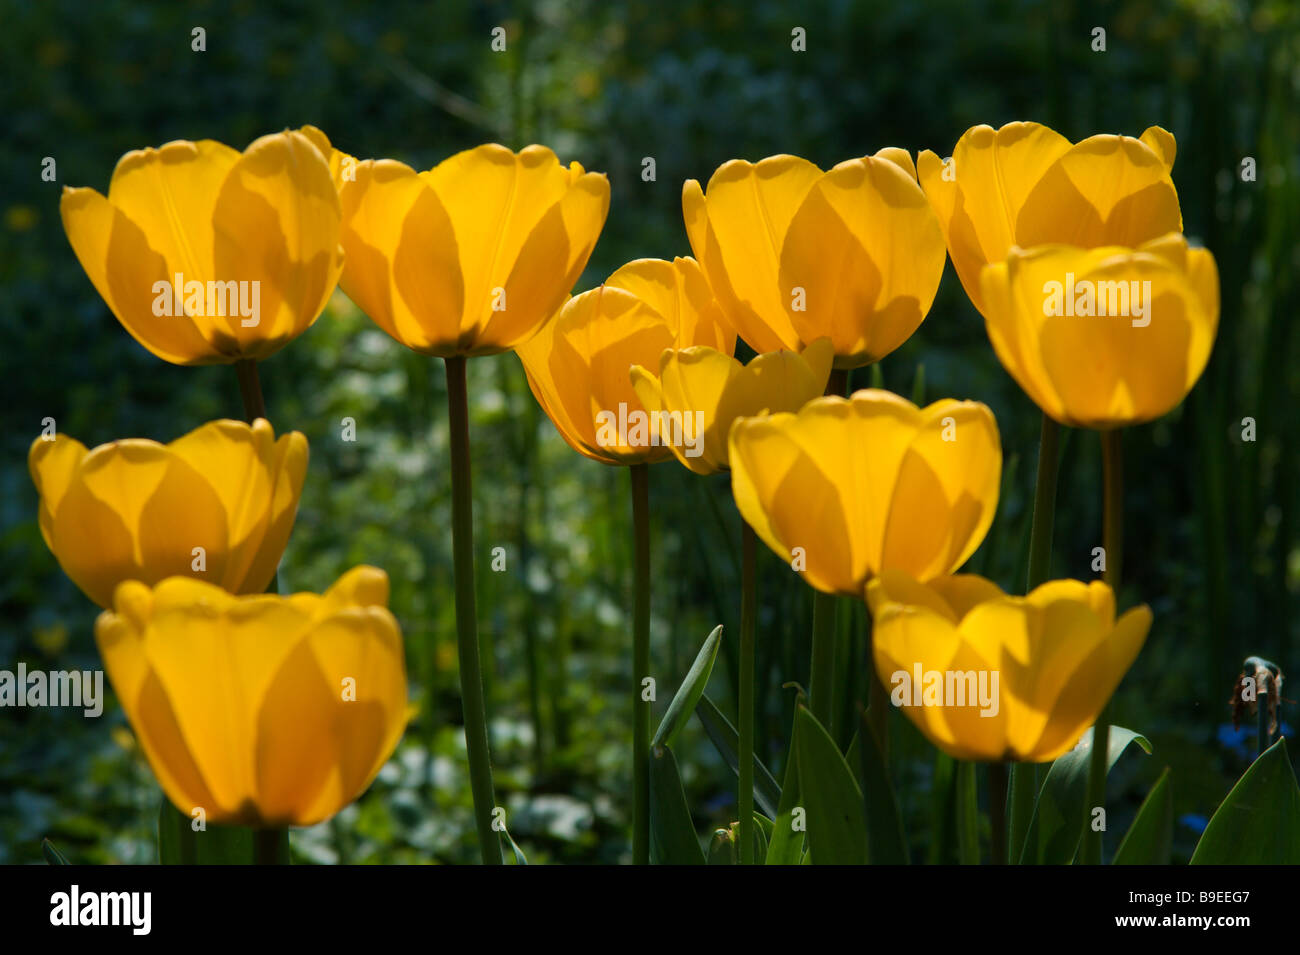 a photography of tulips Stock Photo